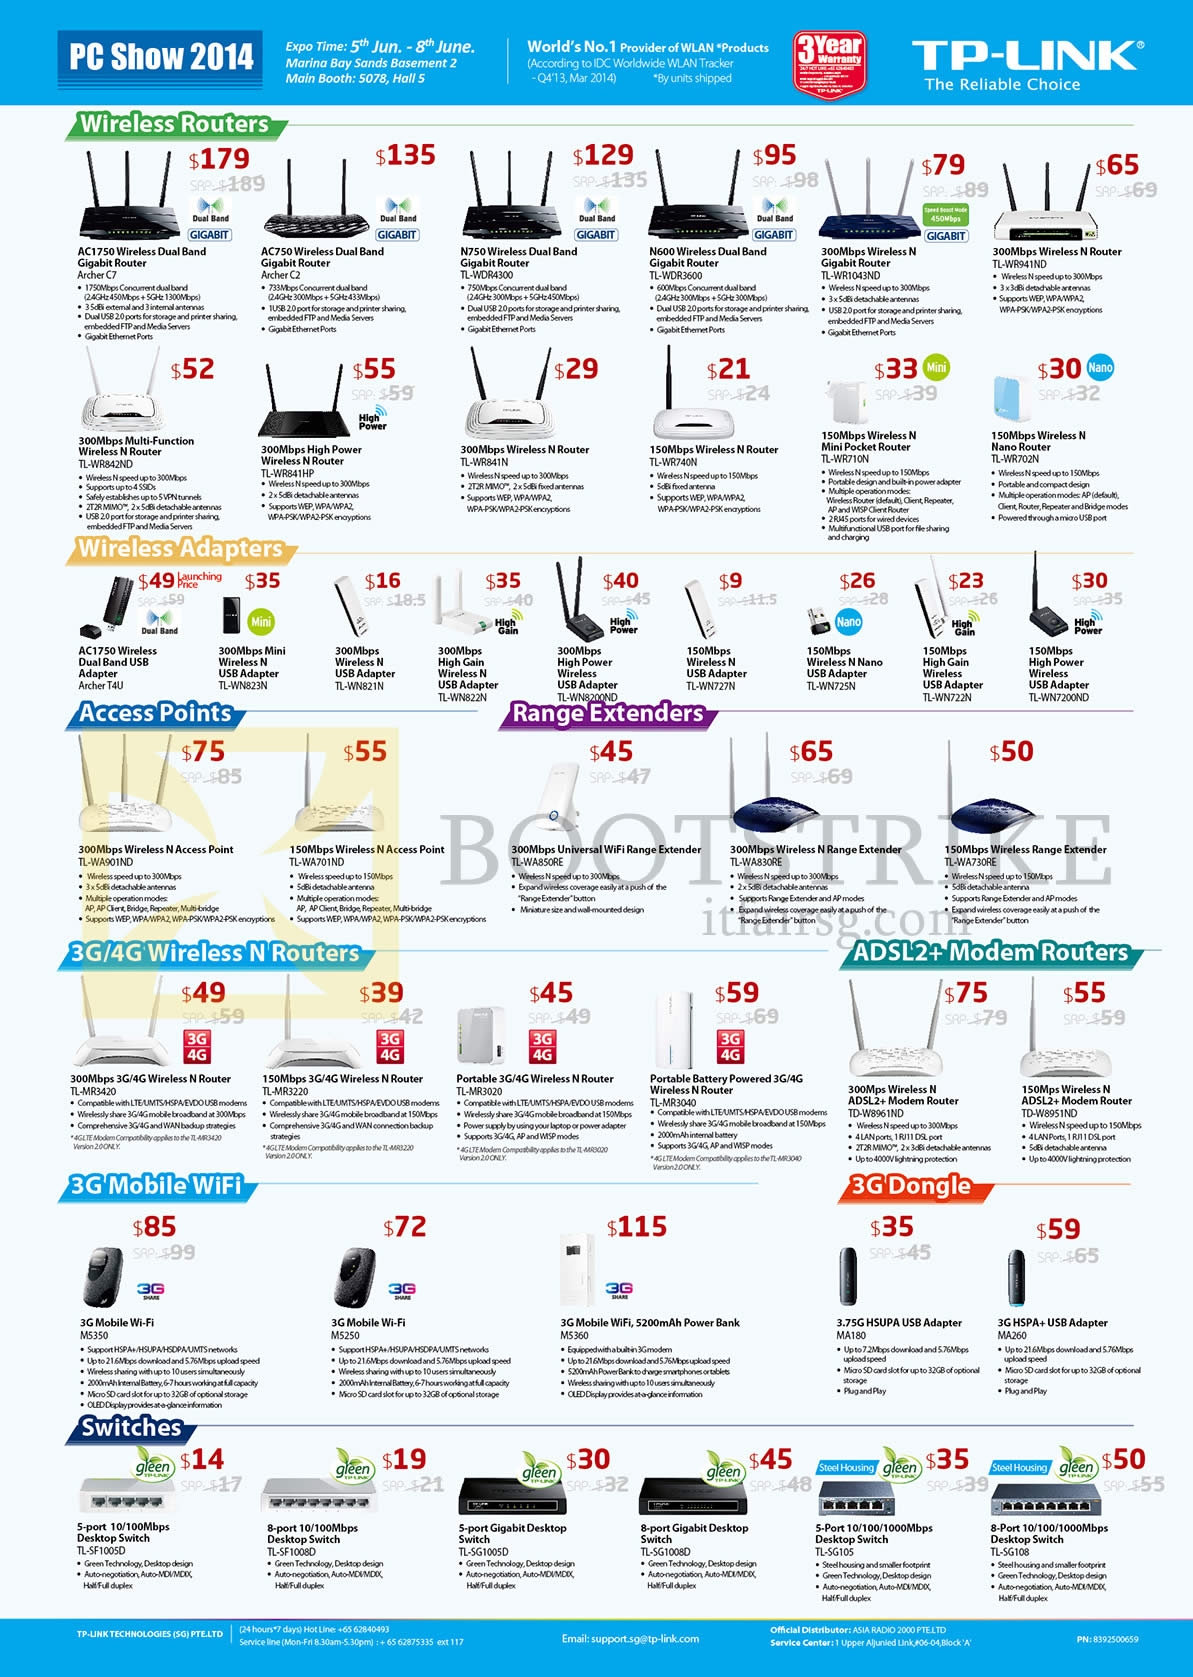 PC SHOW 2014 price list image brochure of Asia Radio TP-Link Networking Wireless Routers, Adapters, Access Points, Range Extender, 3G 4G, ADSL2, Dongle, Switches